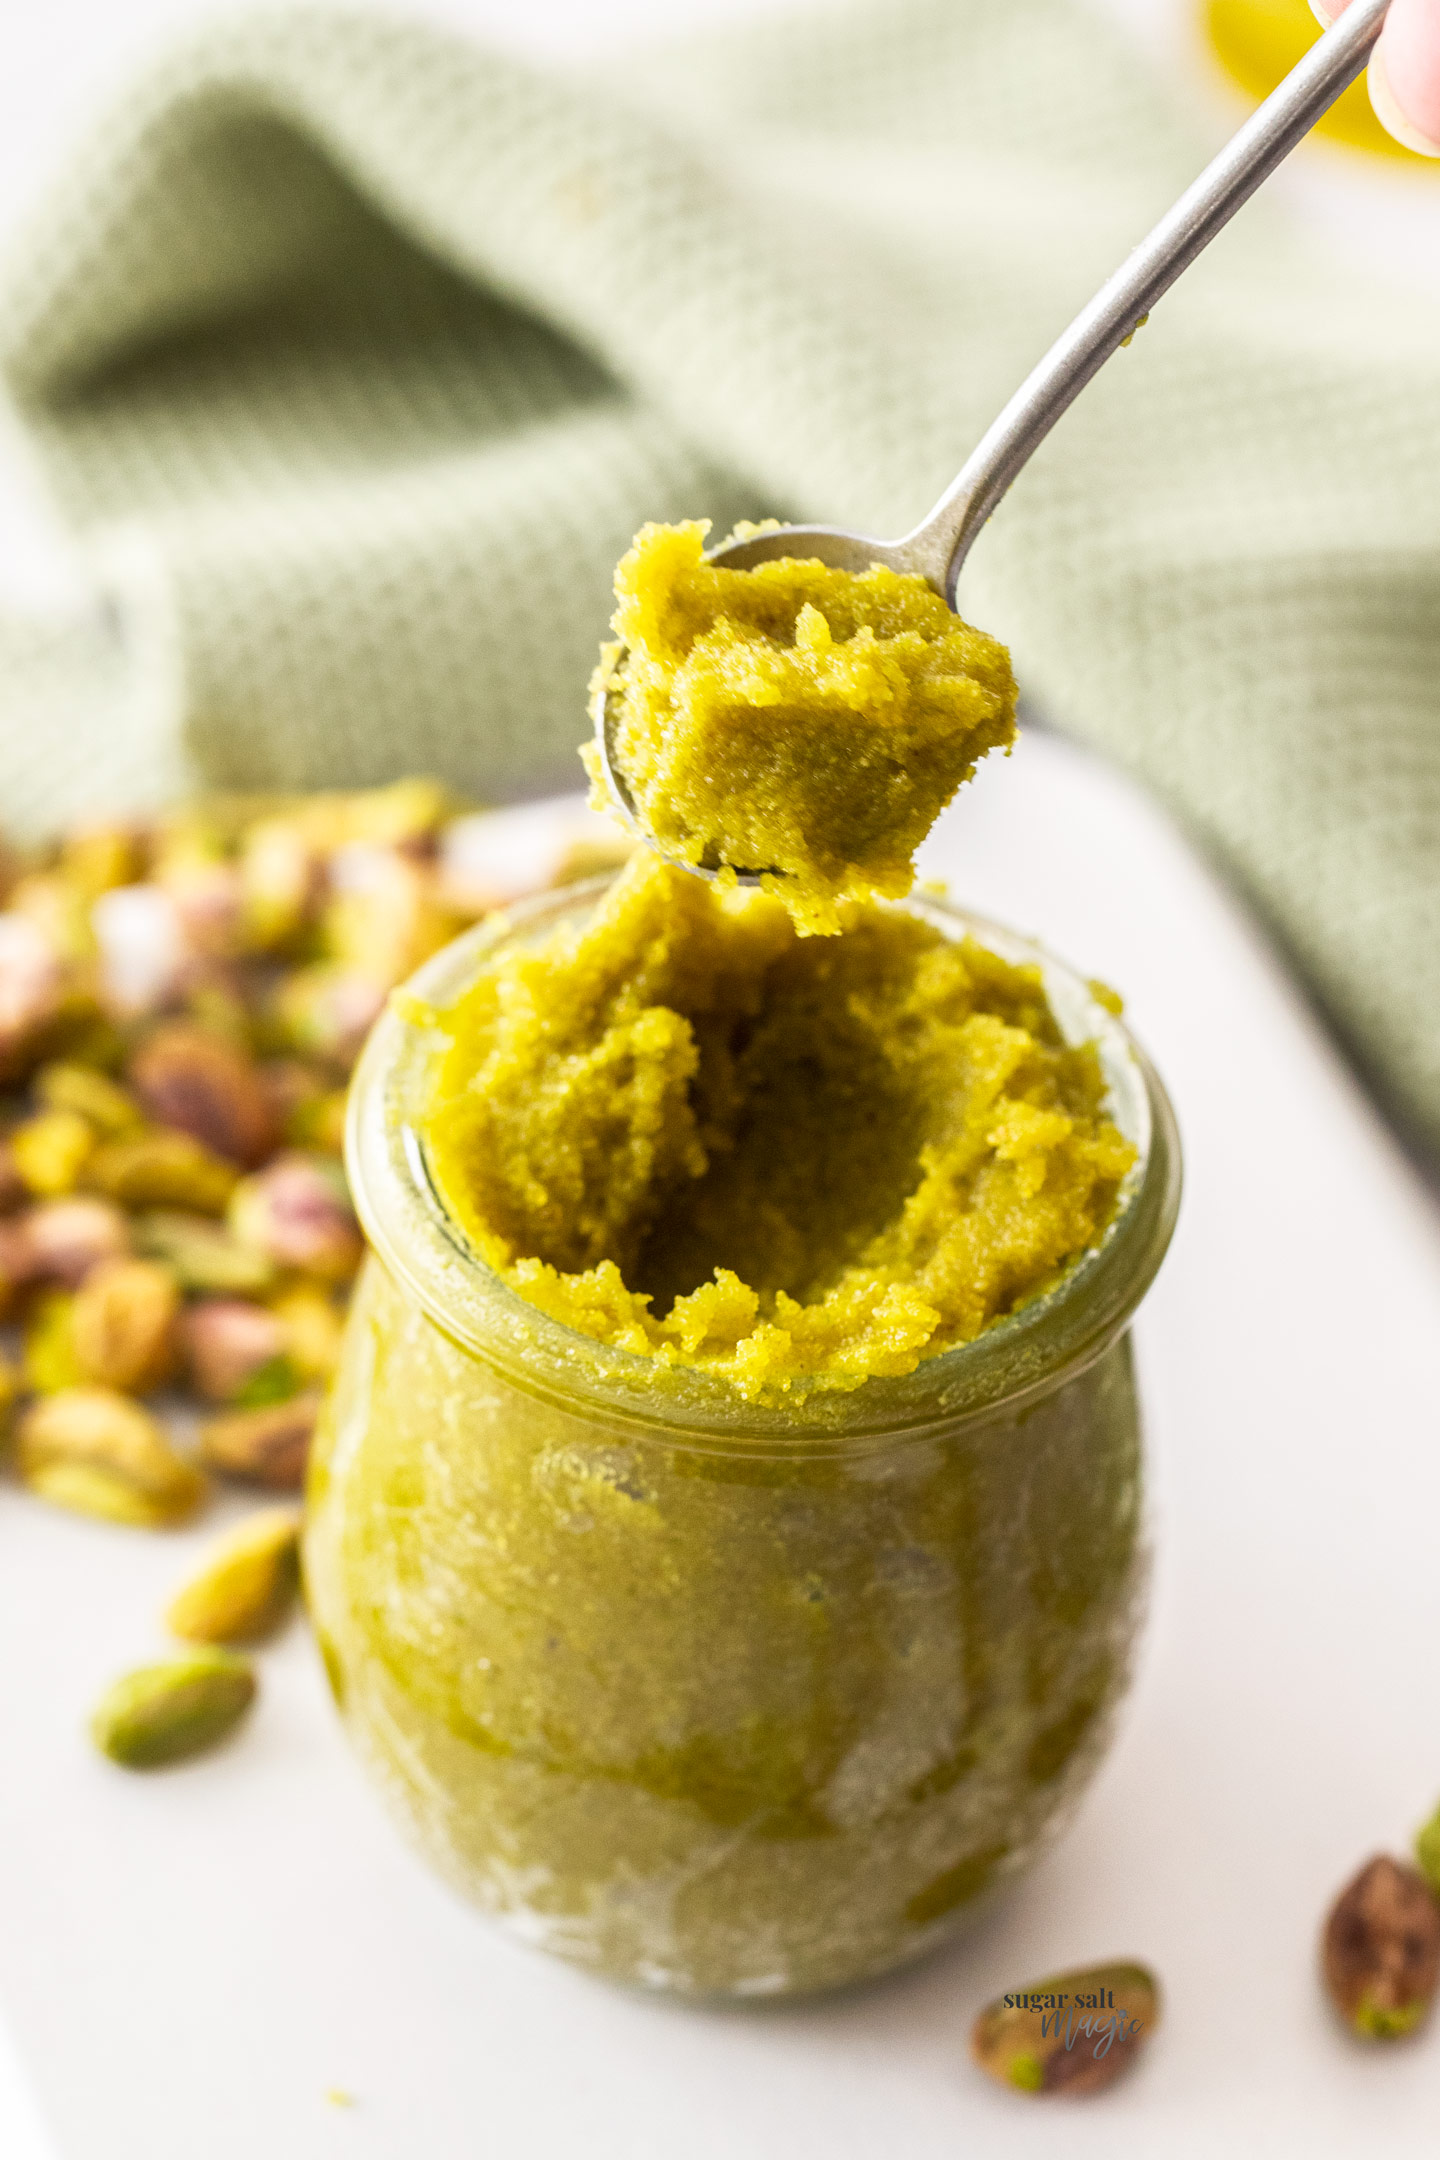 A spoon taking pistachio paste from a jar.